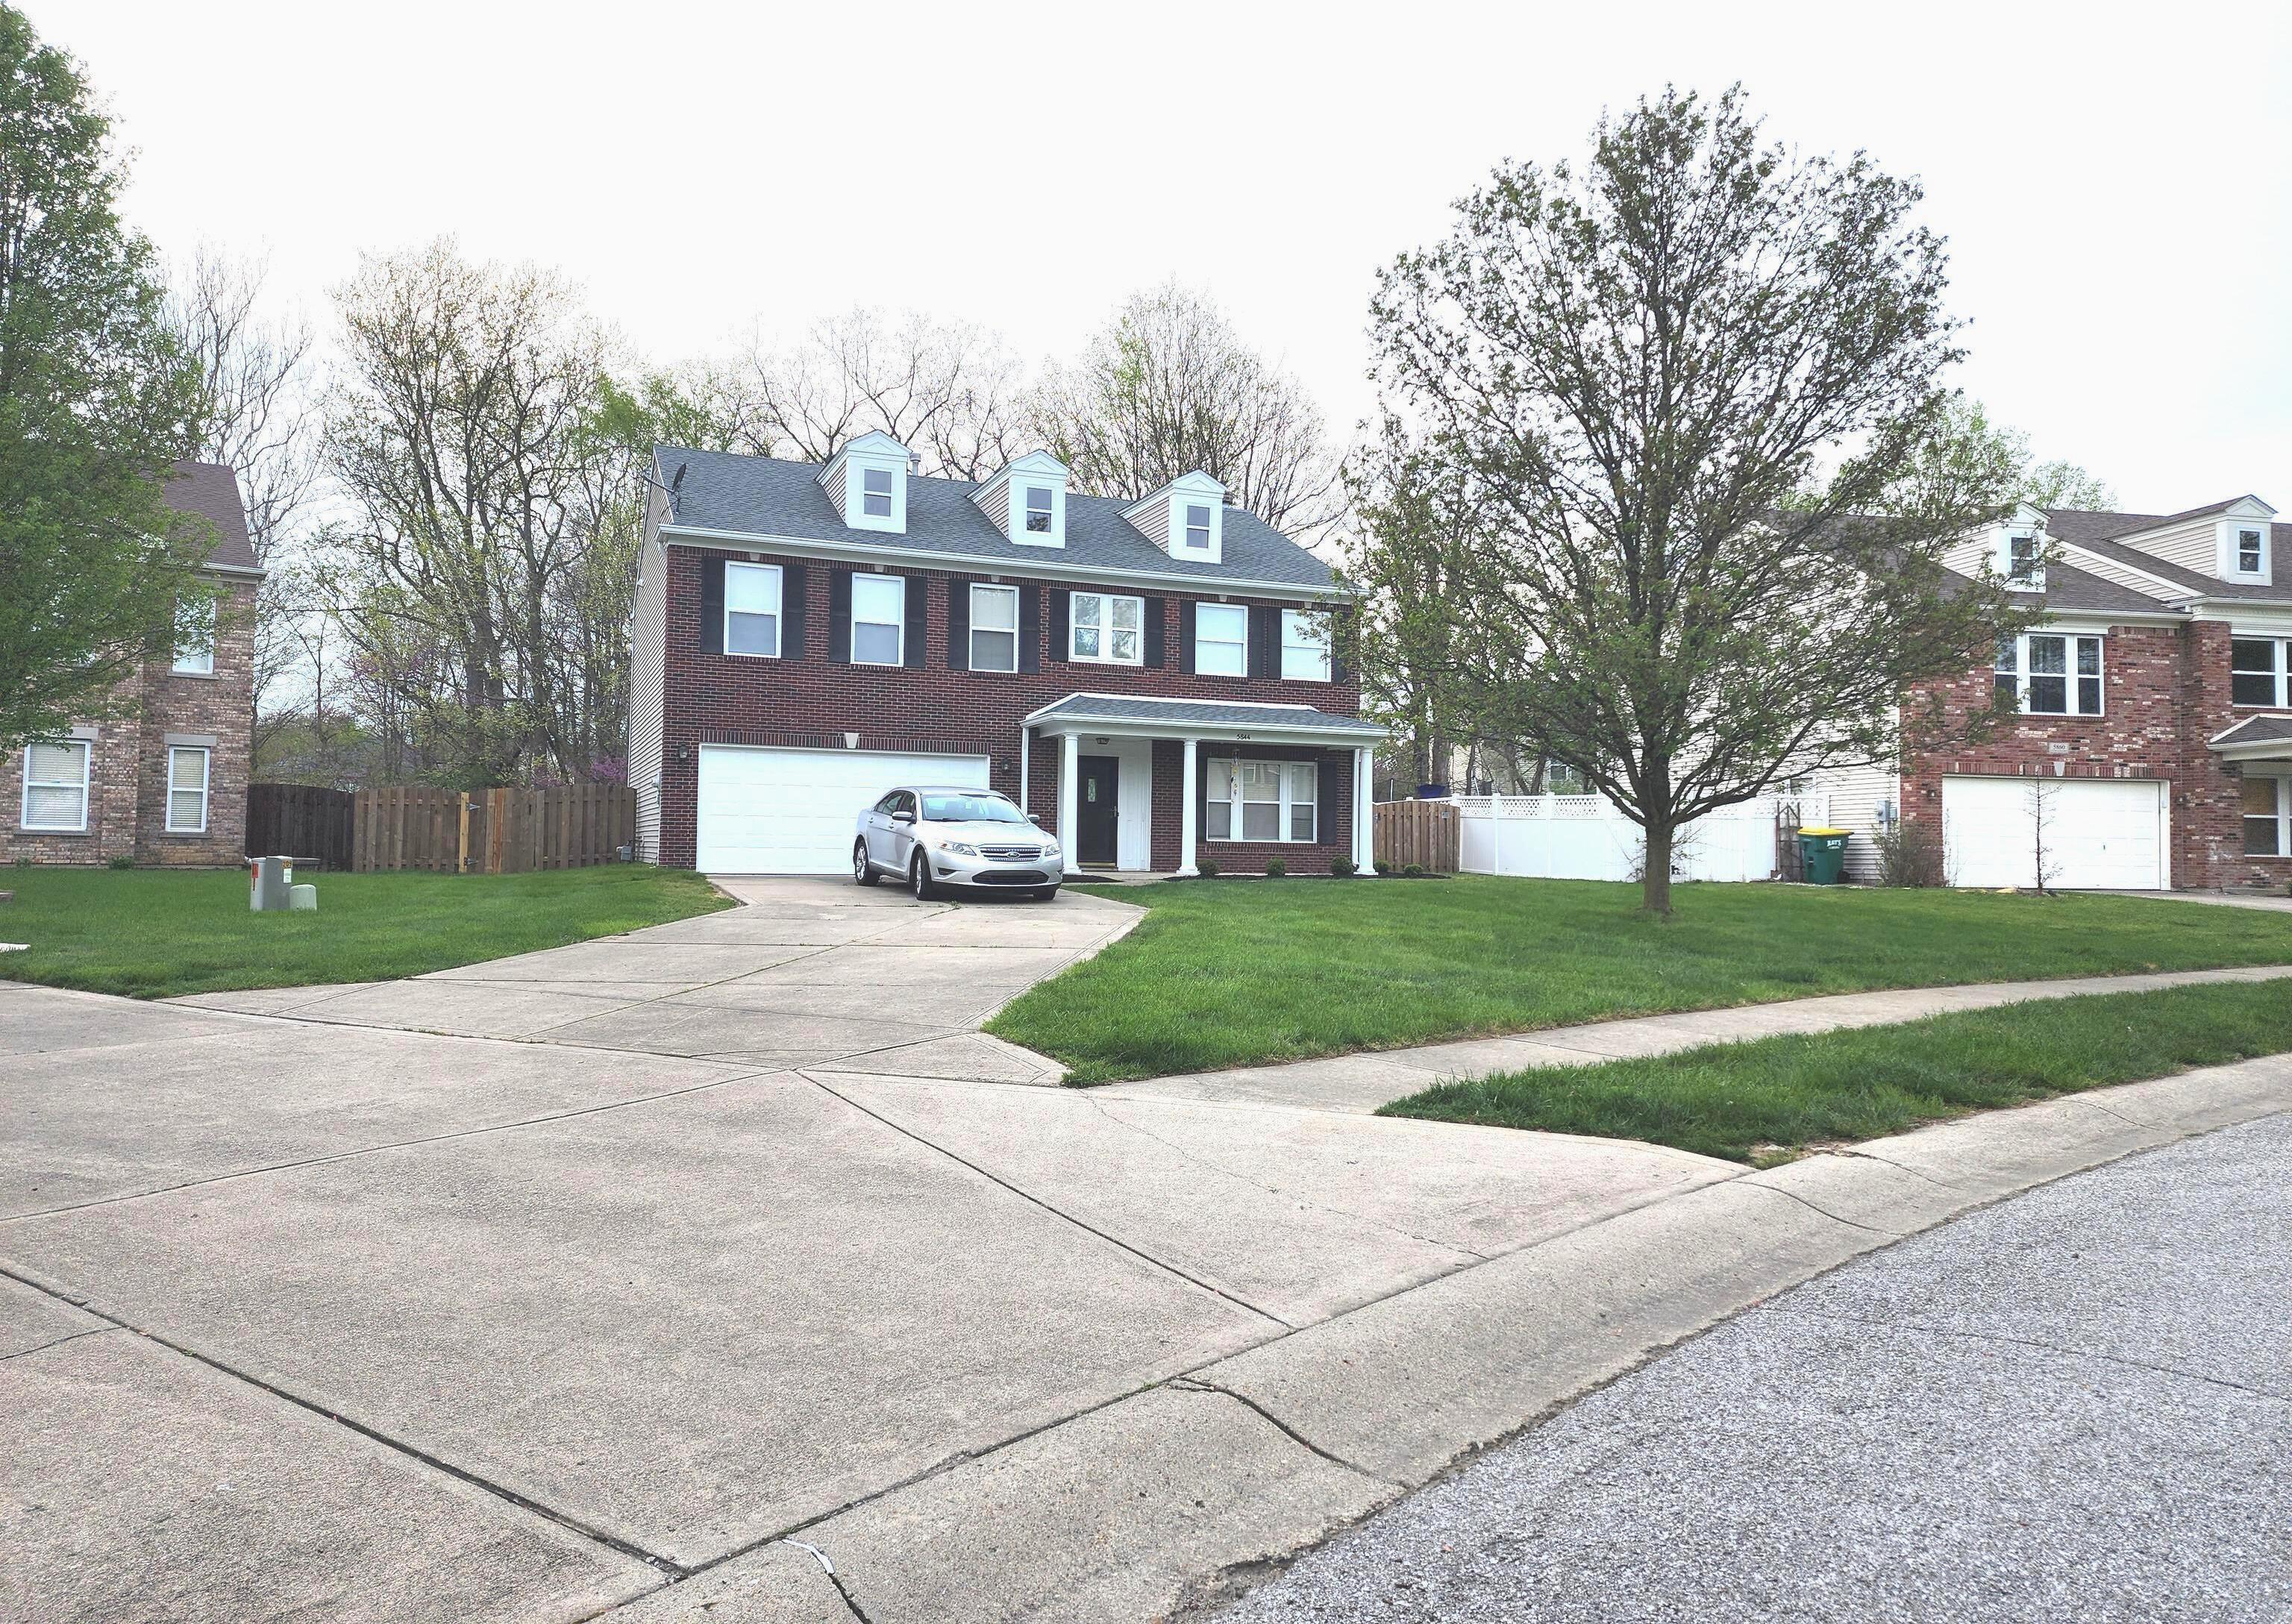 Photo one of 5844 Ascending Heights Dr Indianapolis IN 46234 | MLS 21973100